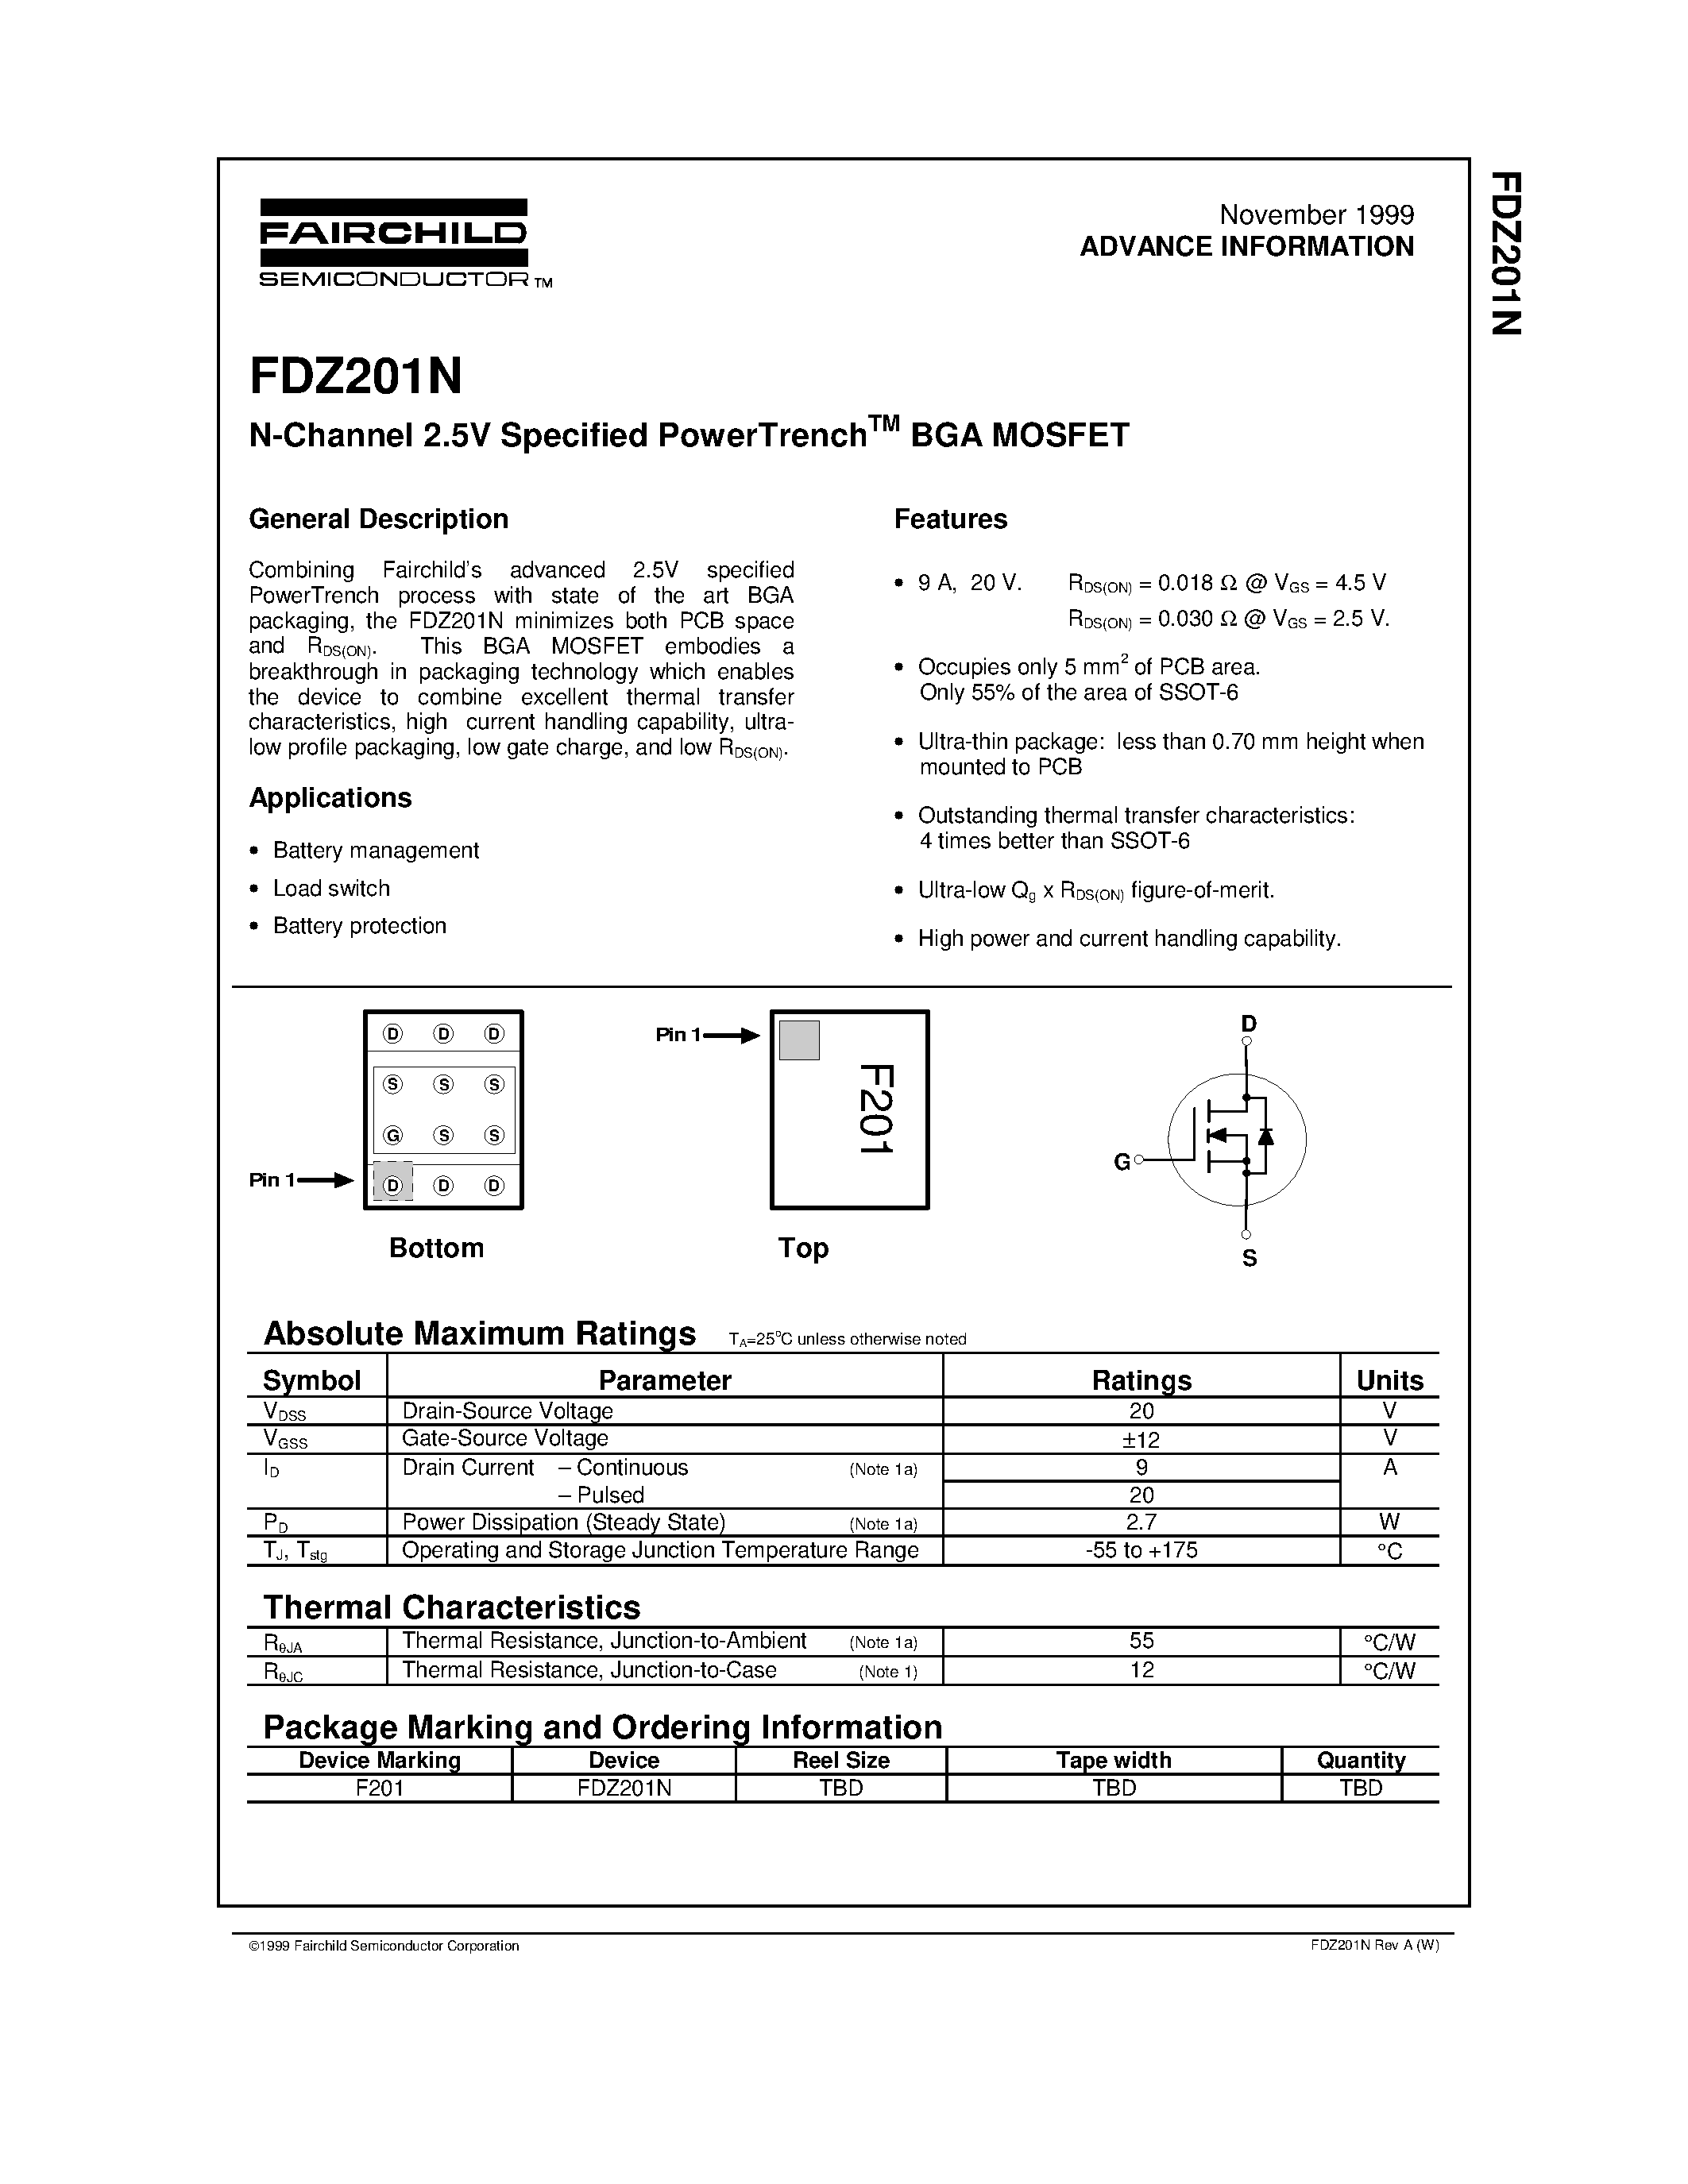 Datasheet FDZ201N - N-Channel 2.5V Specified PowerTrenchTM BGA MOSFET page 1